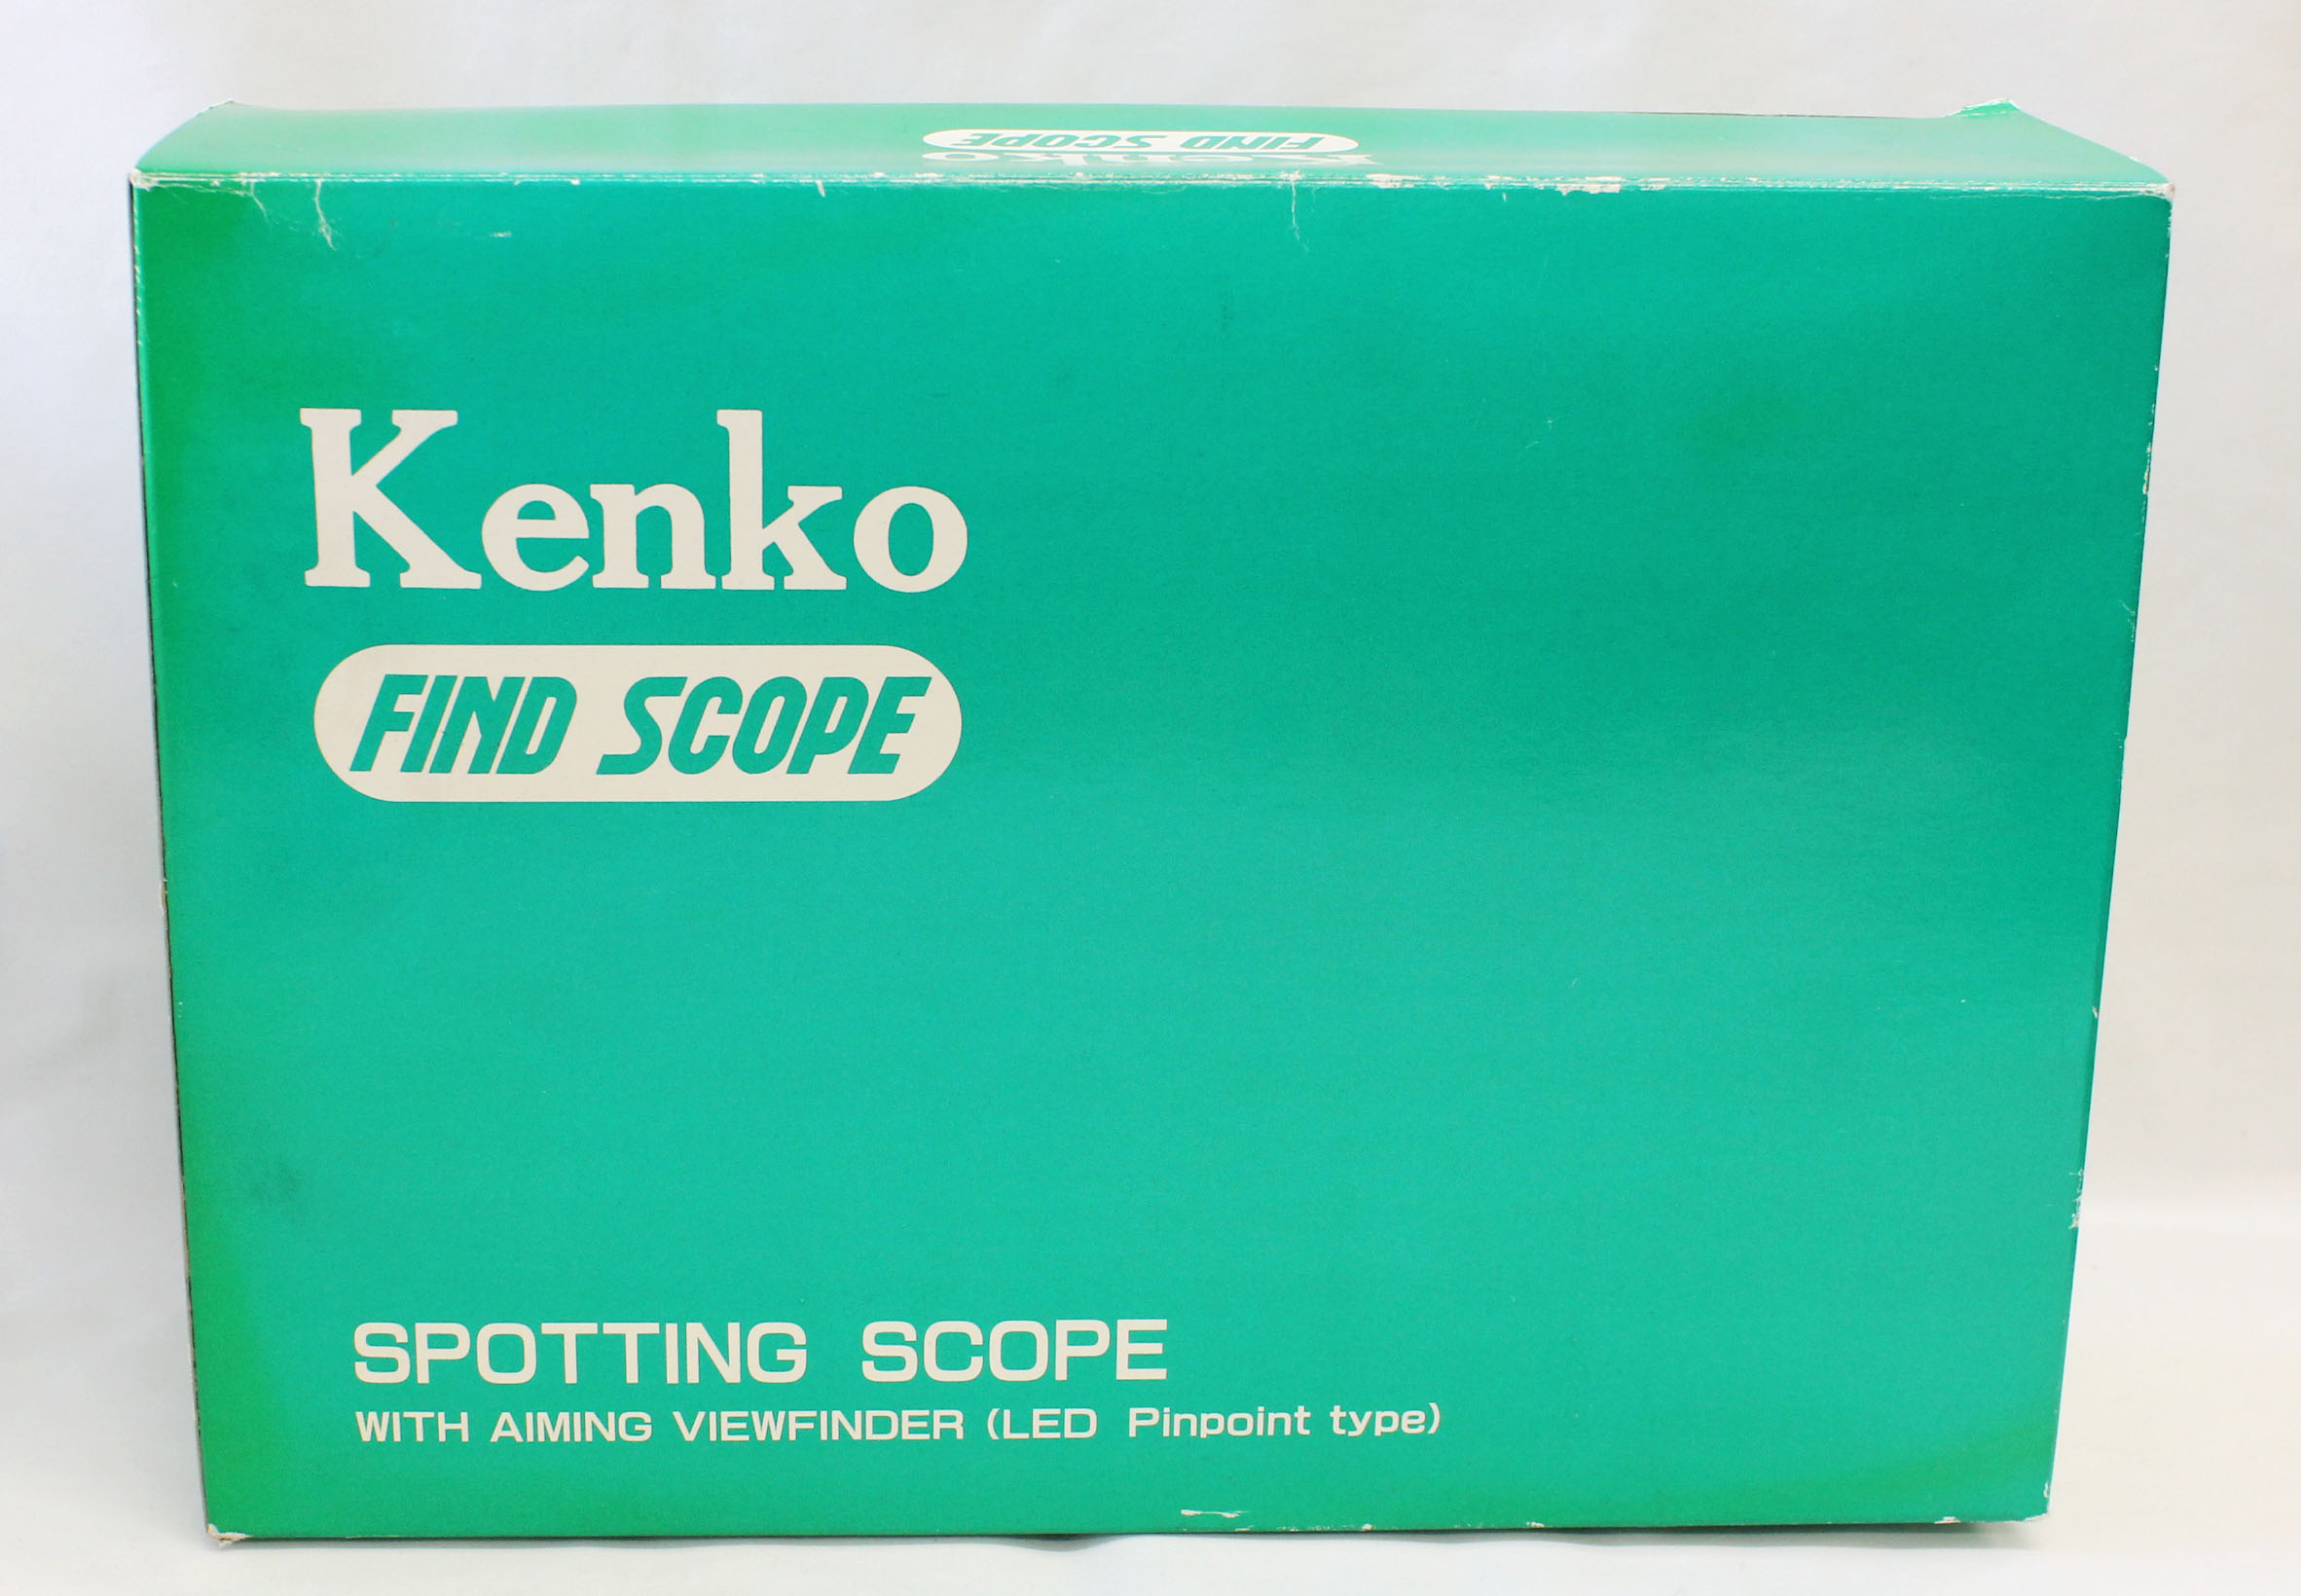 Kenko Find Scope Spotting Scope 20x D=56.5 with LED Aiming View Finder in Case / Box from Japan Photo 11